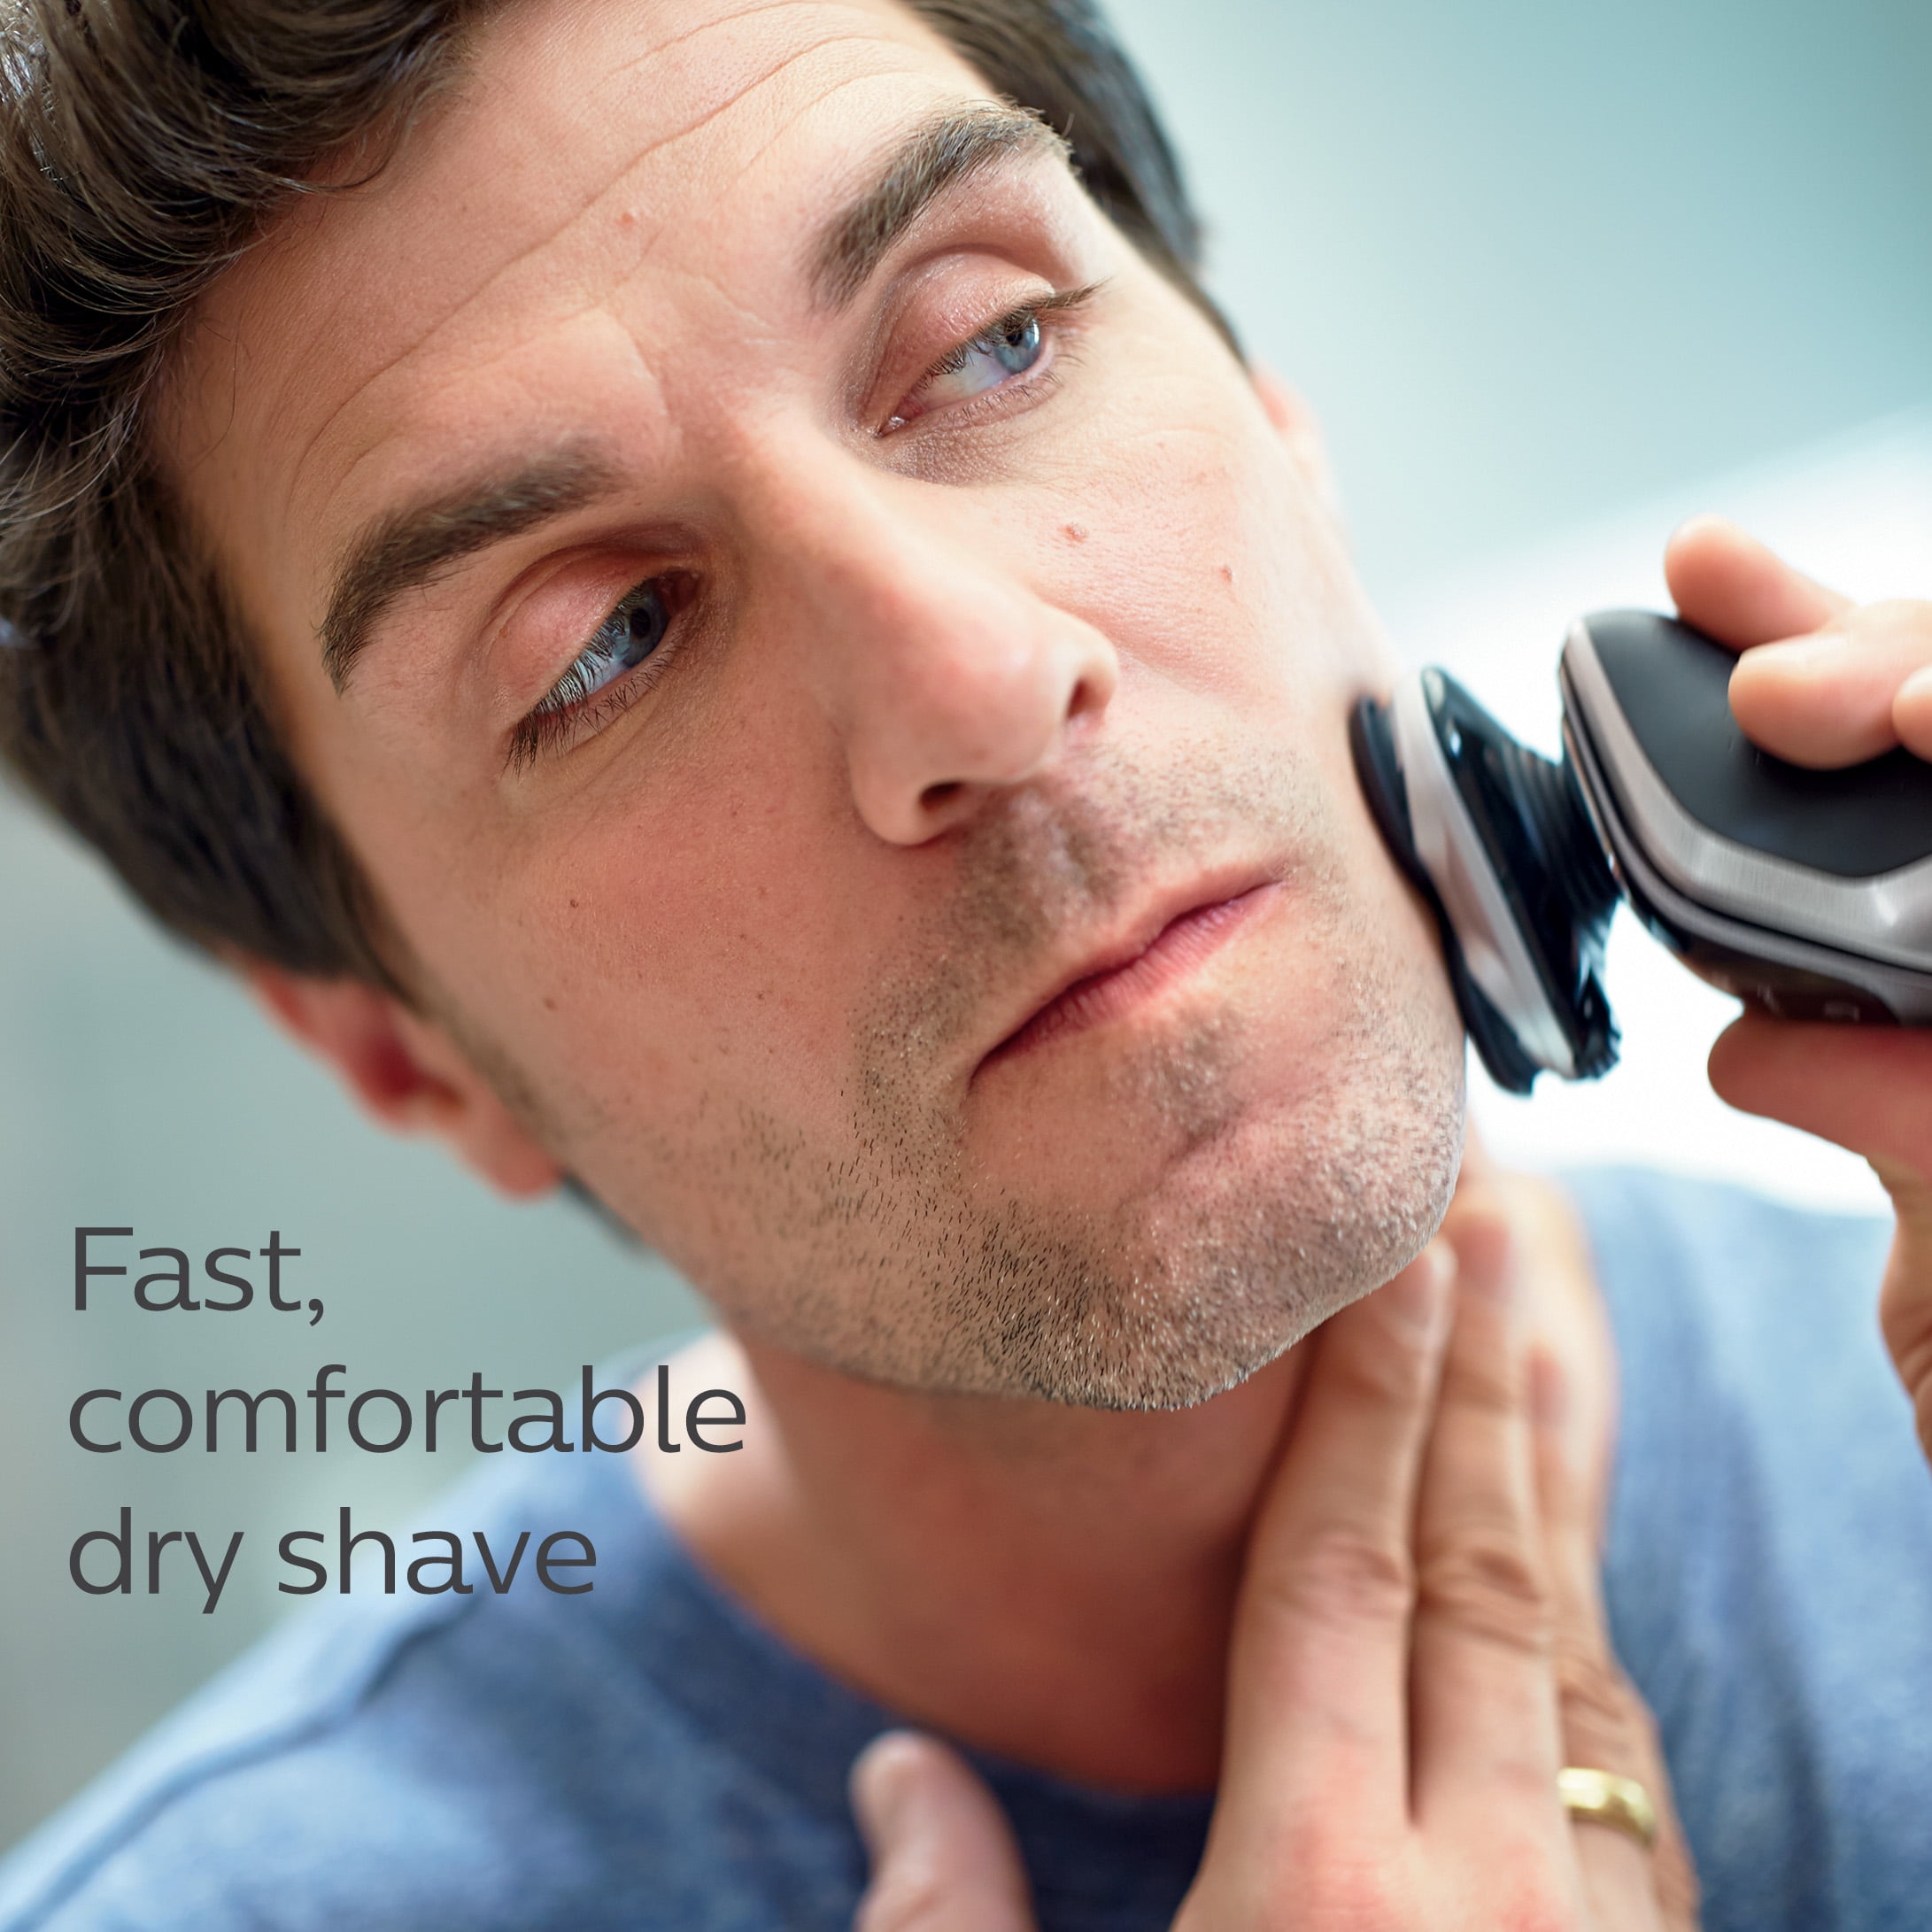 philips norelco electric shaver 5750